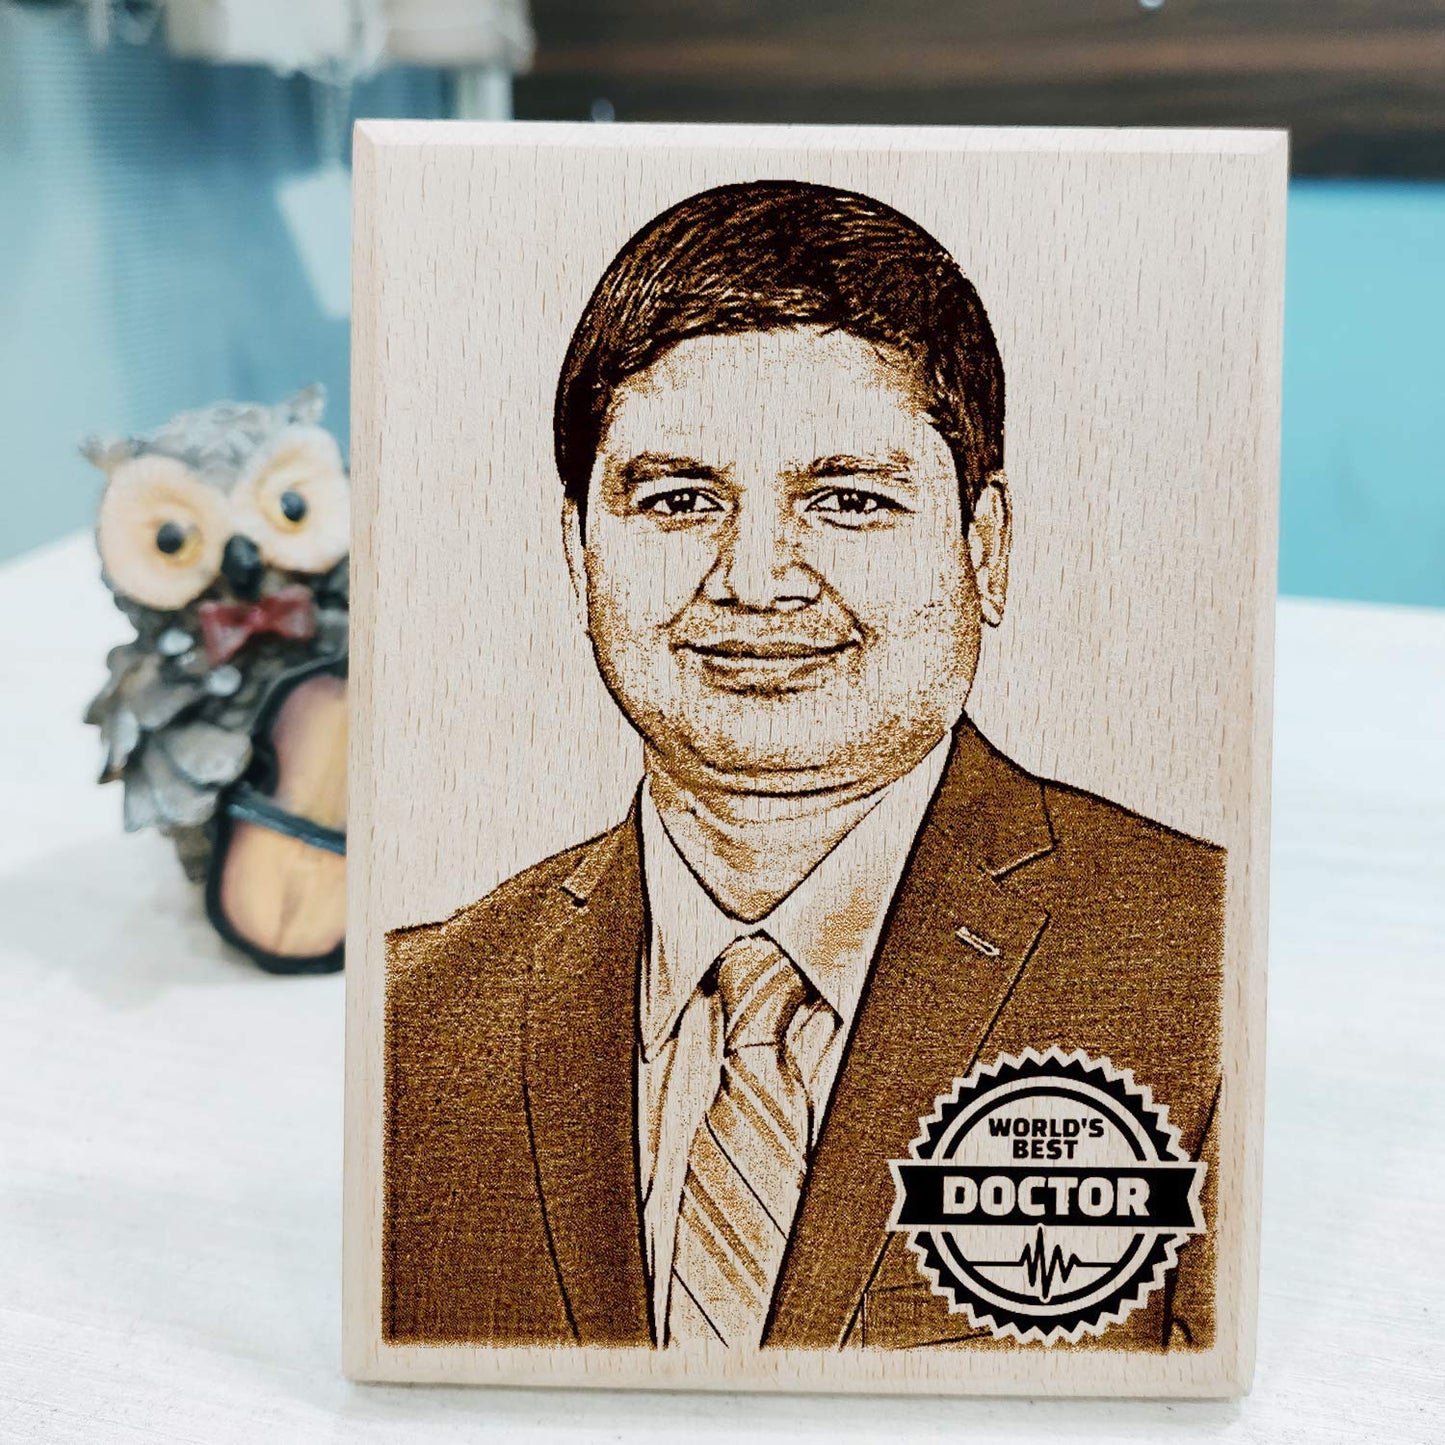 Personalized World’s Best Doctor Photo Frame